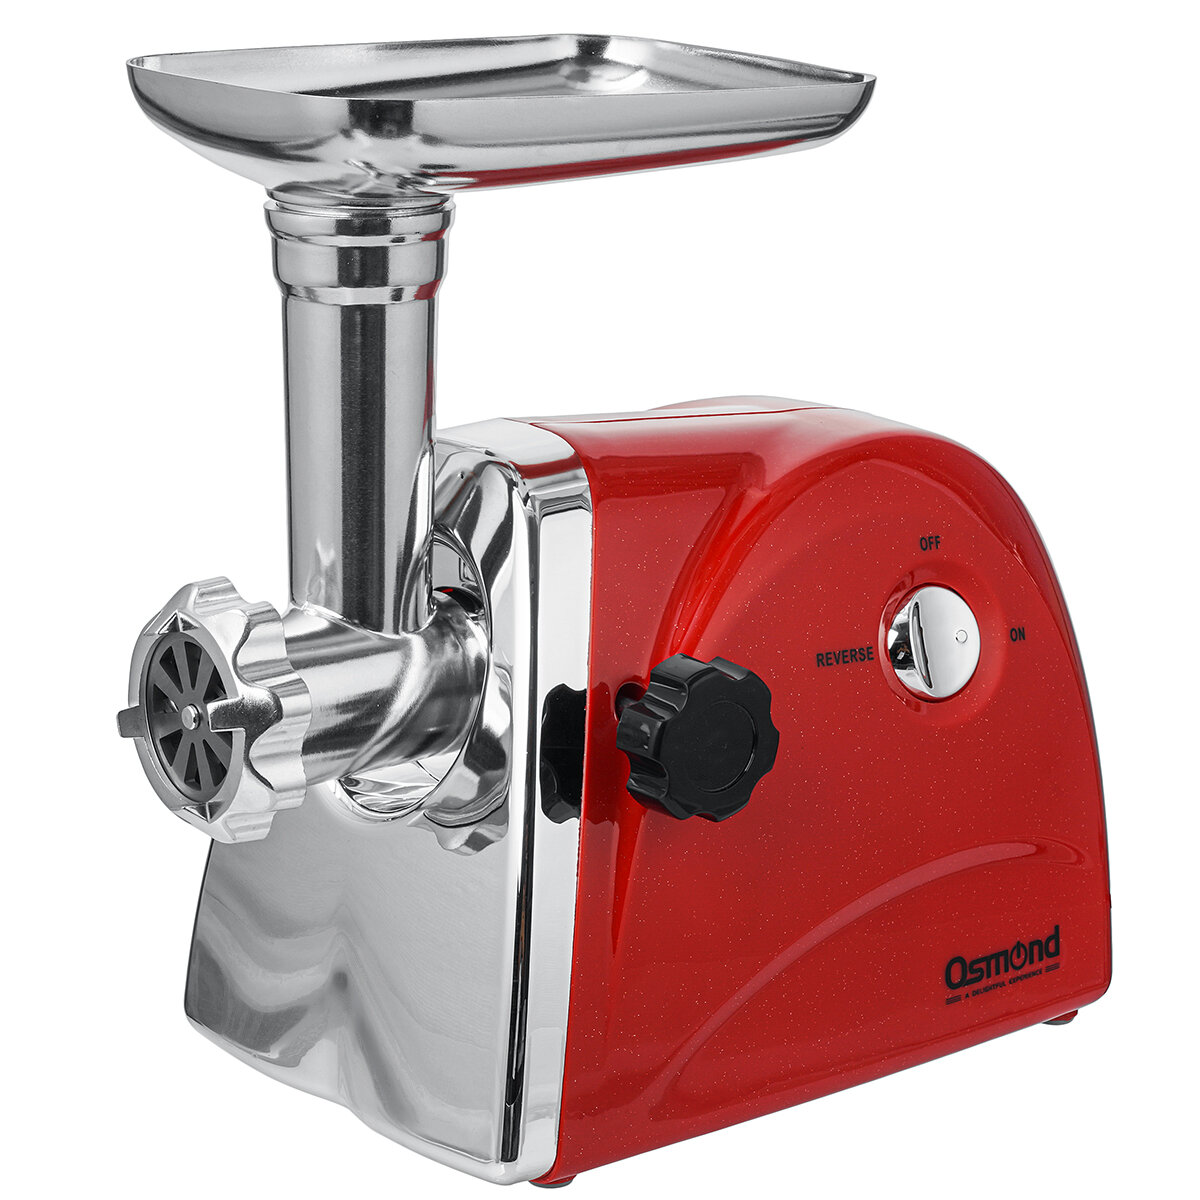 Osmond New 2800W Electric Meat Grinders Stainless Steel Heavy Duty Mincer Sausage Stuffer Food Proce